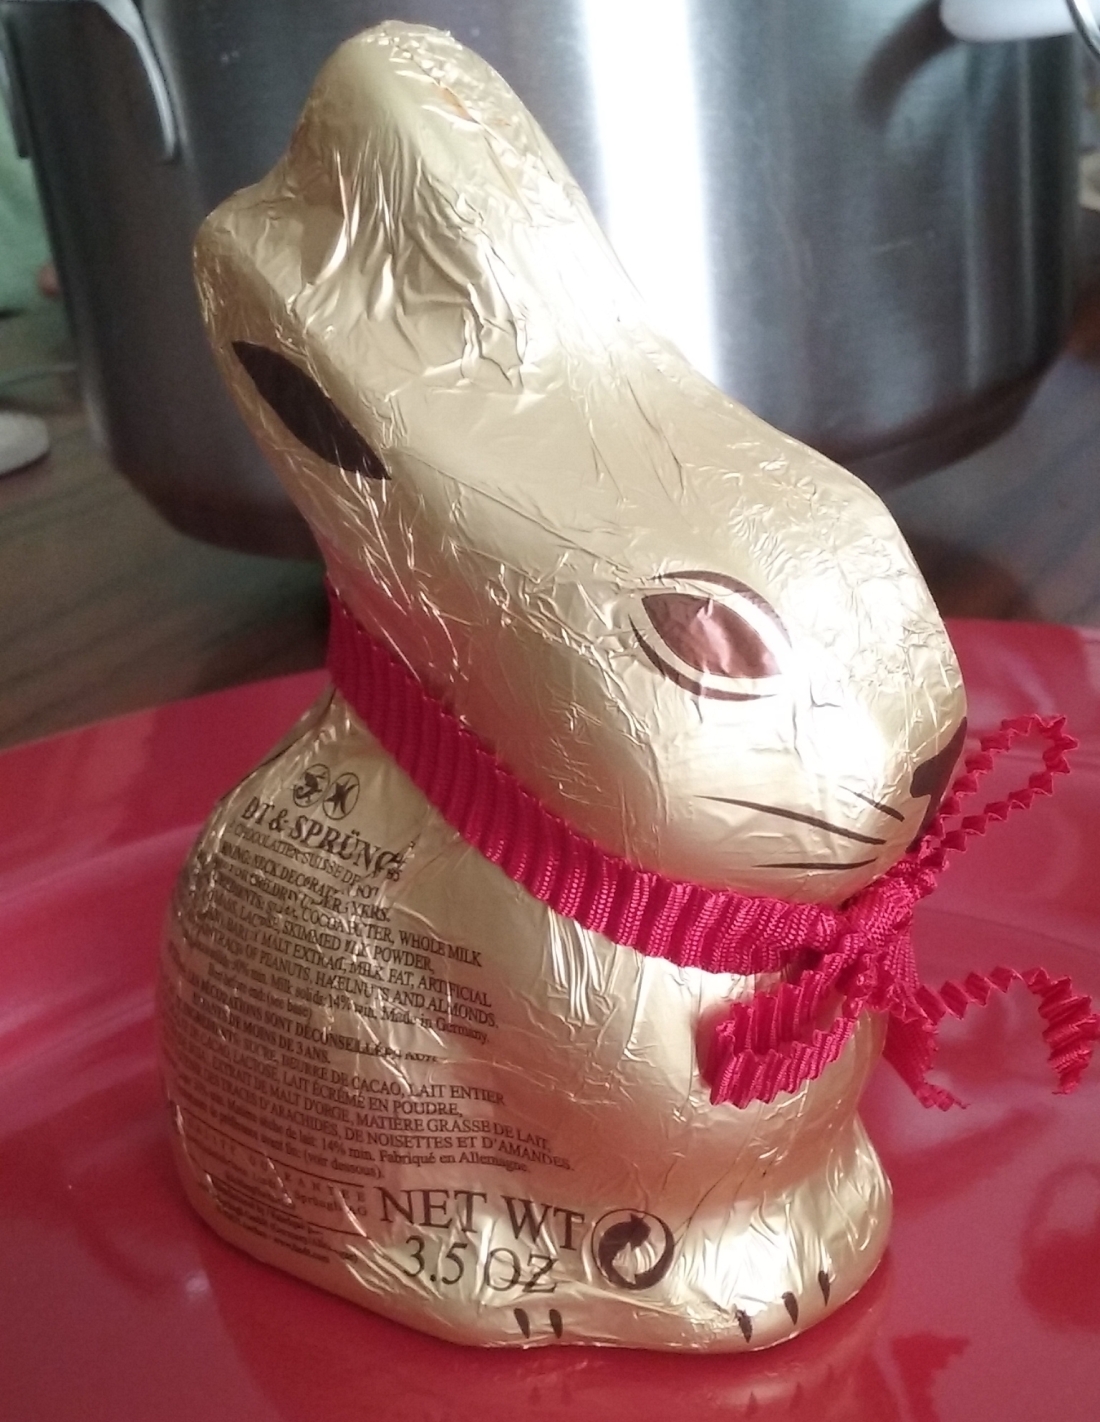 The chocolate bunny is the important part of the meal for a compulsive overeater